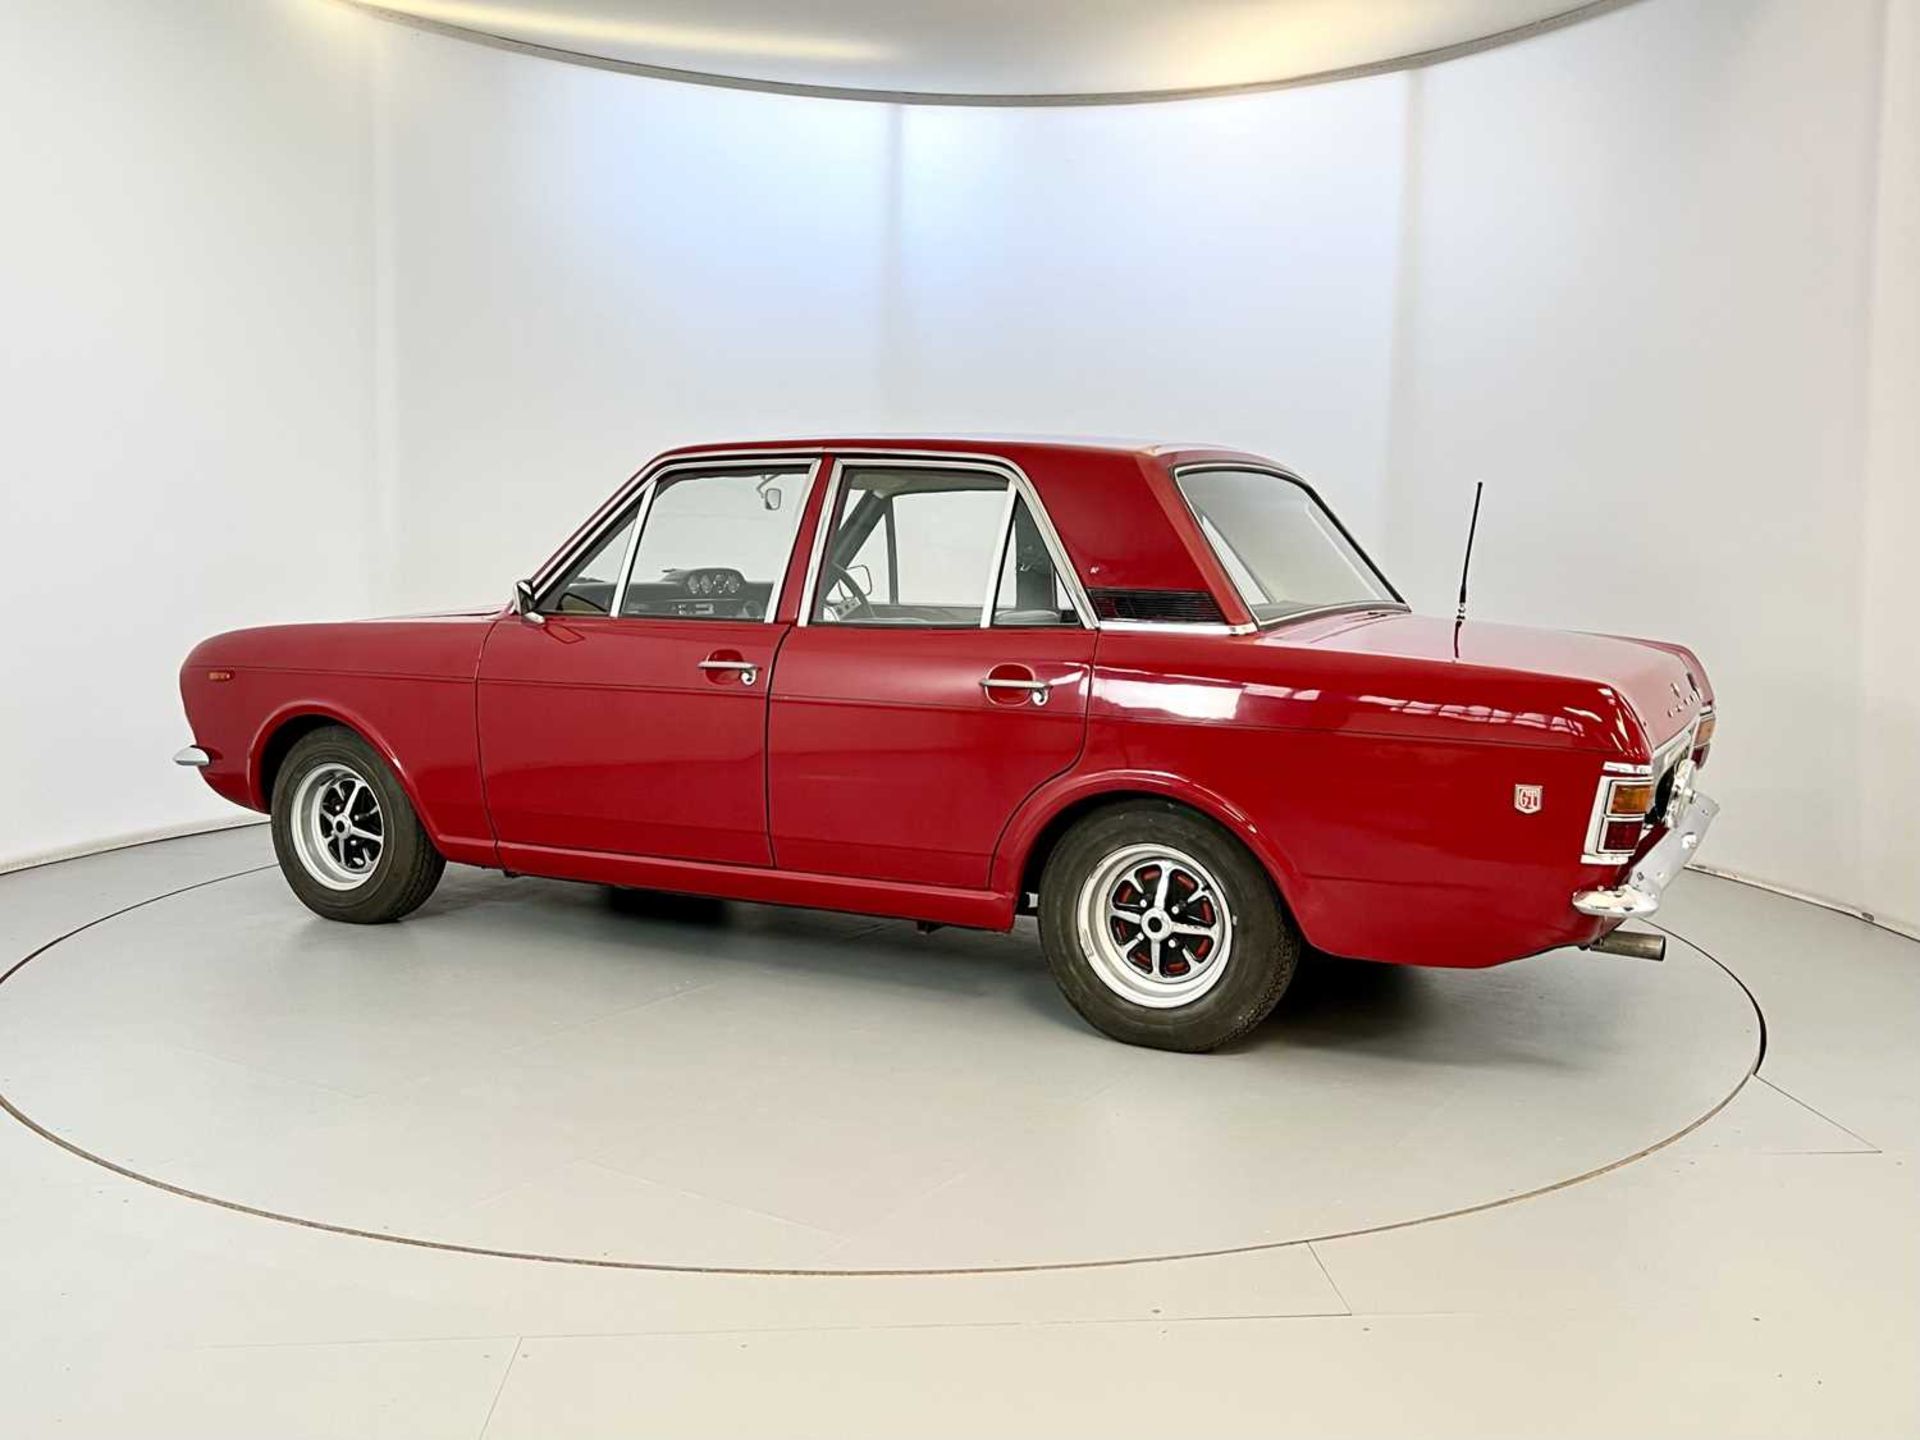 1967 Ford Cortina 1600GT - Image 6 of 37